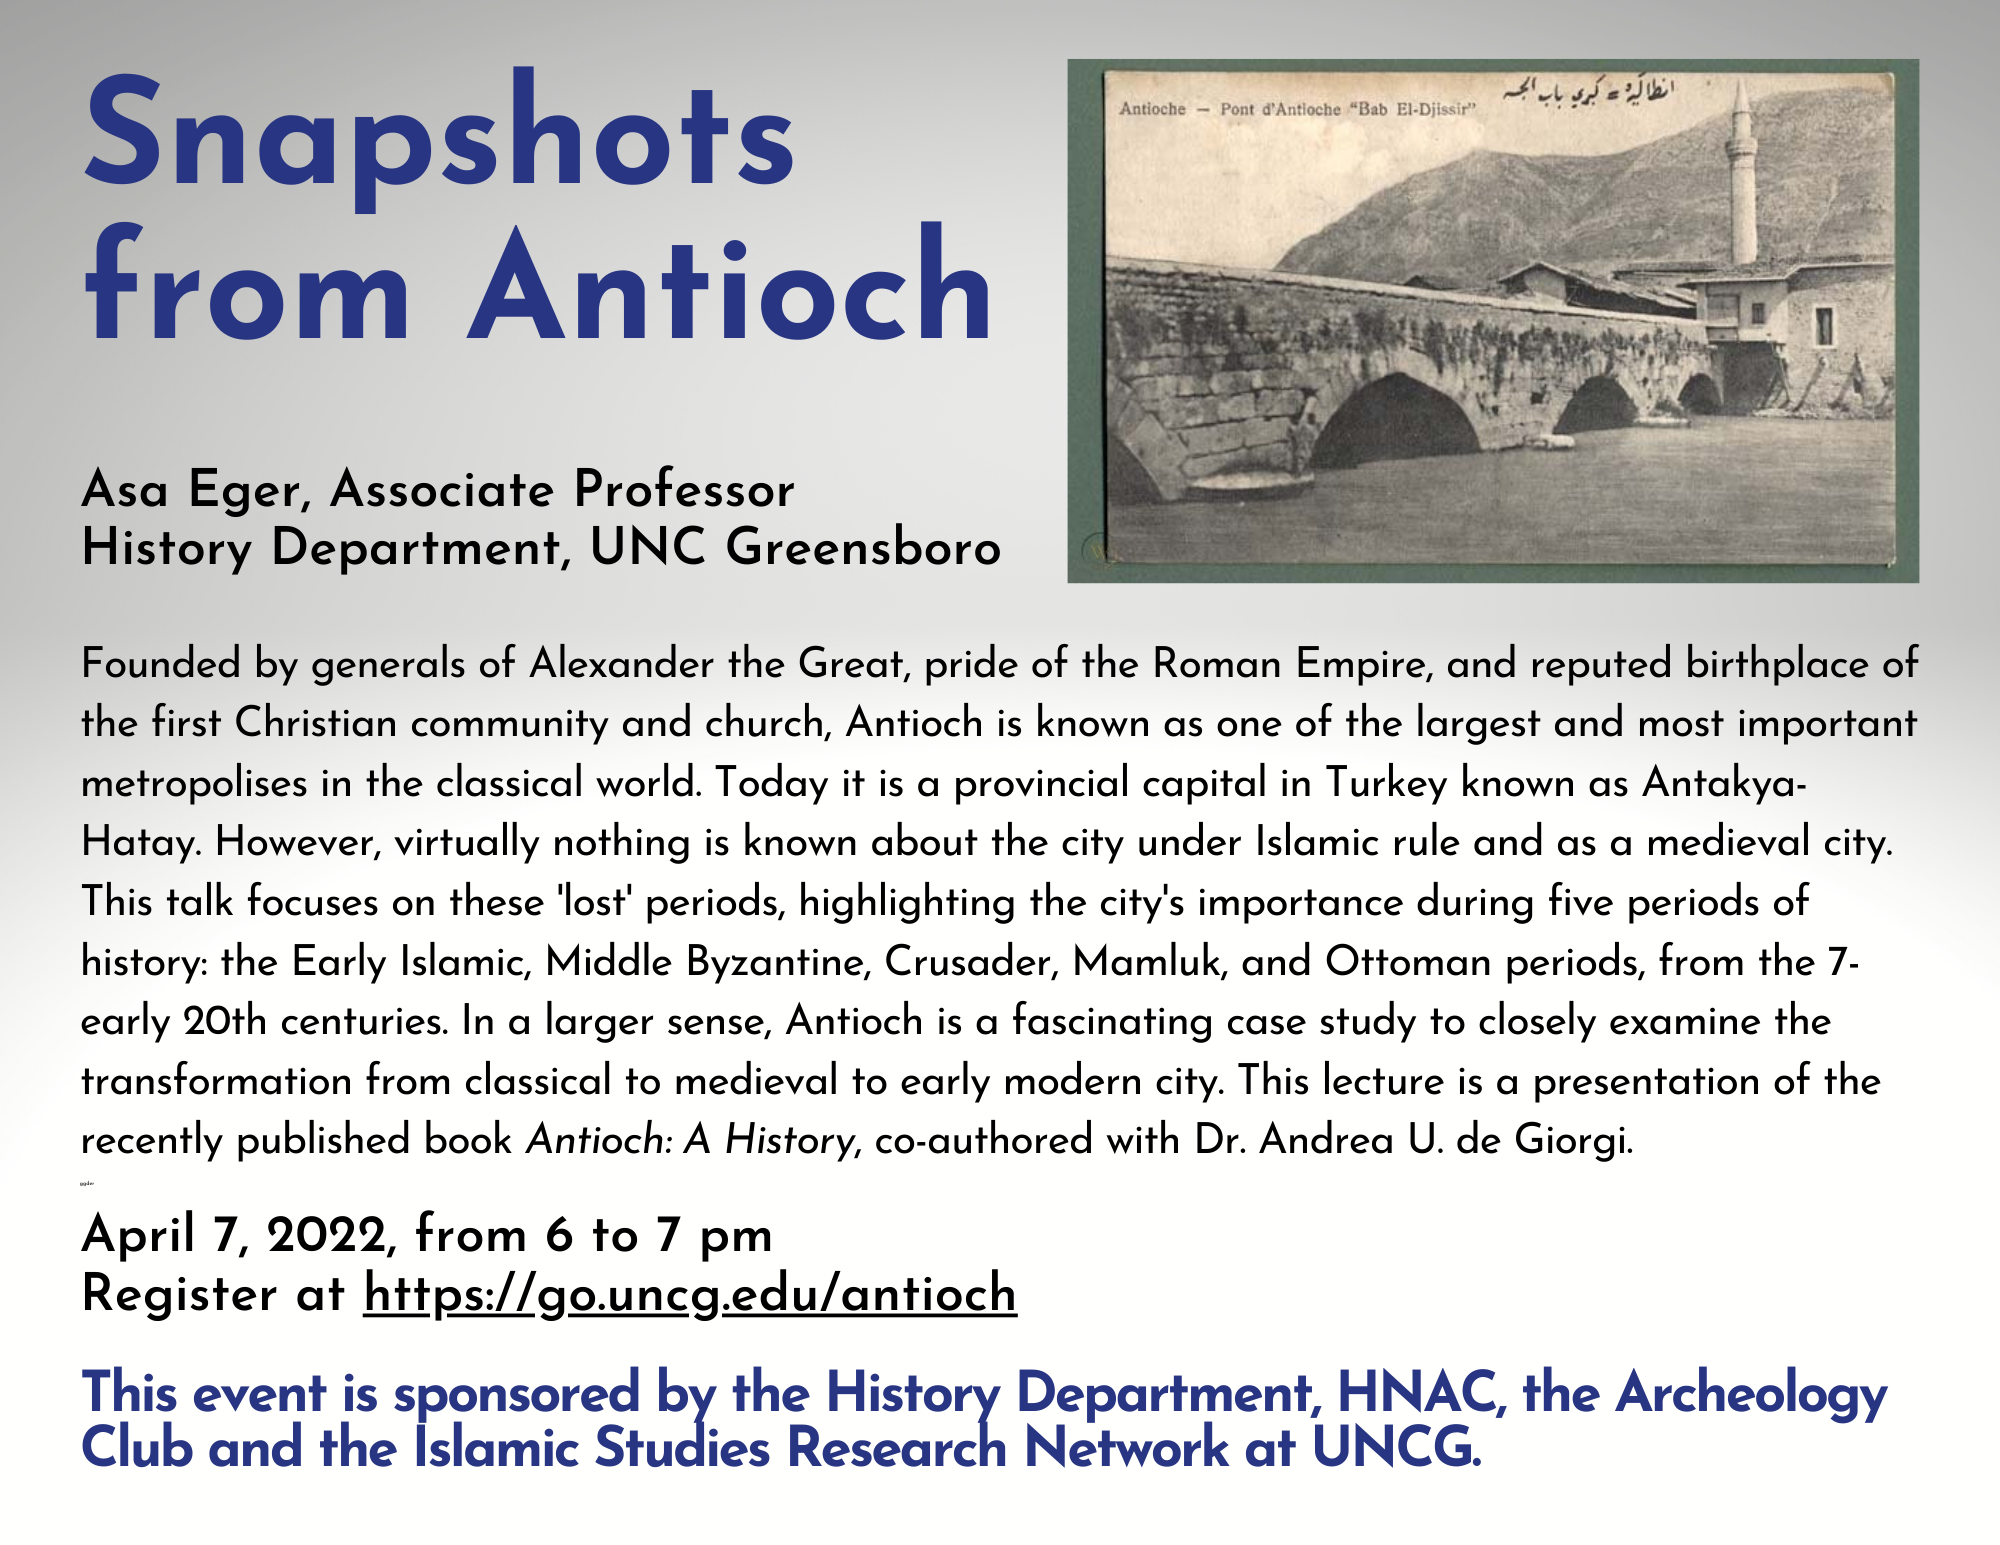 Snapshots from Antioch event